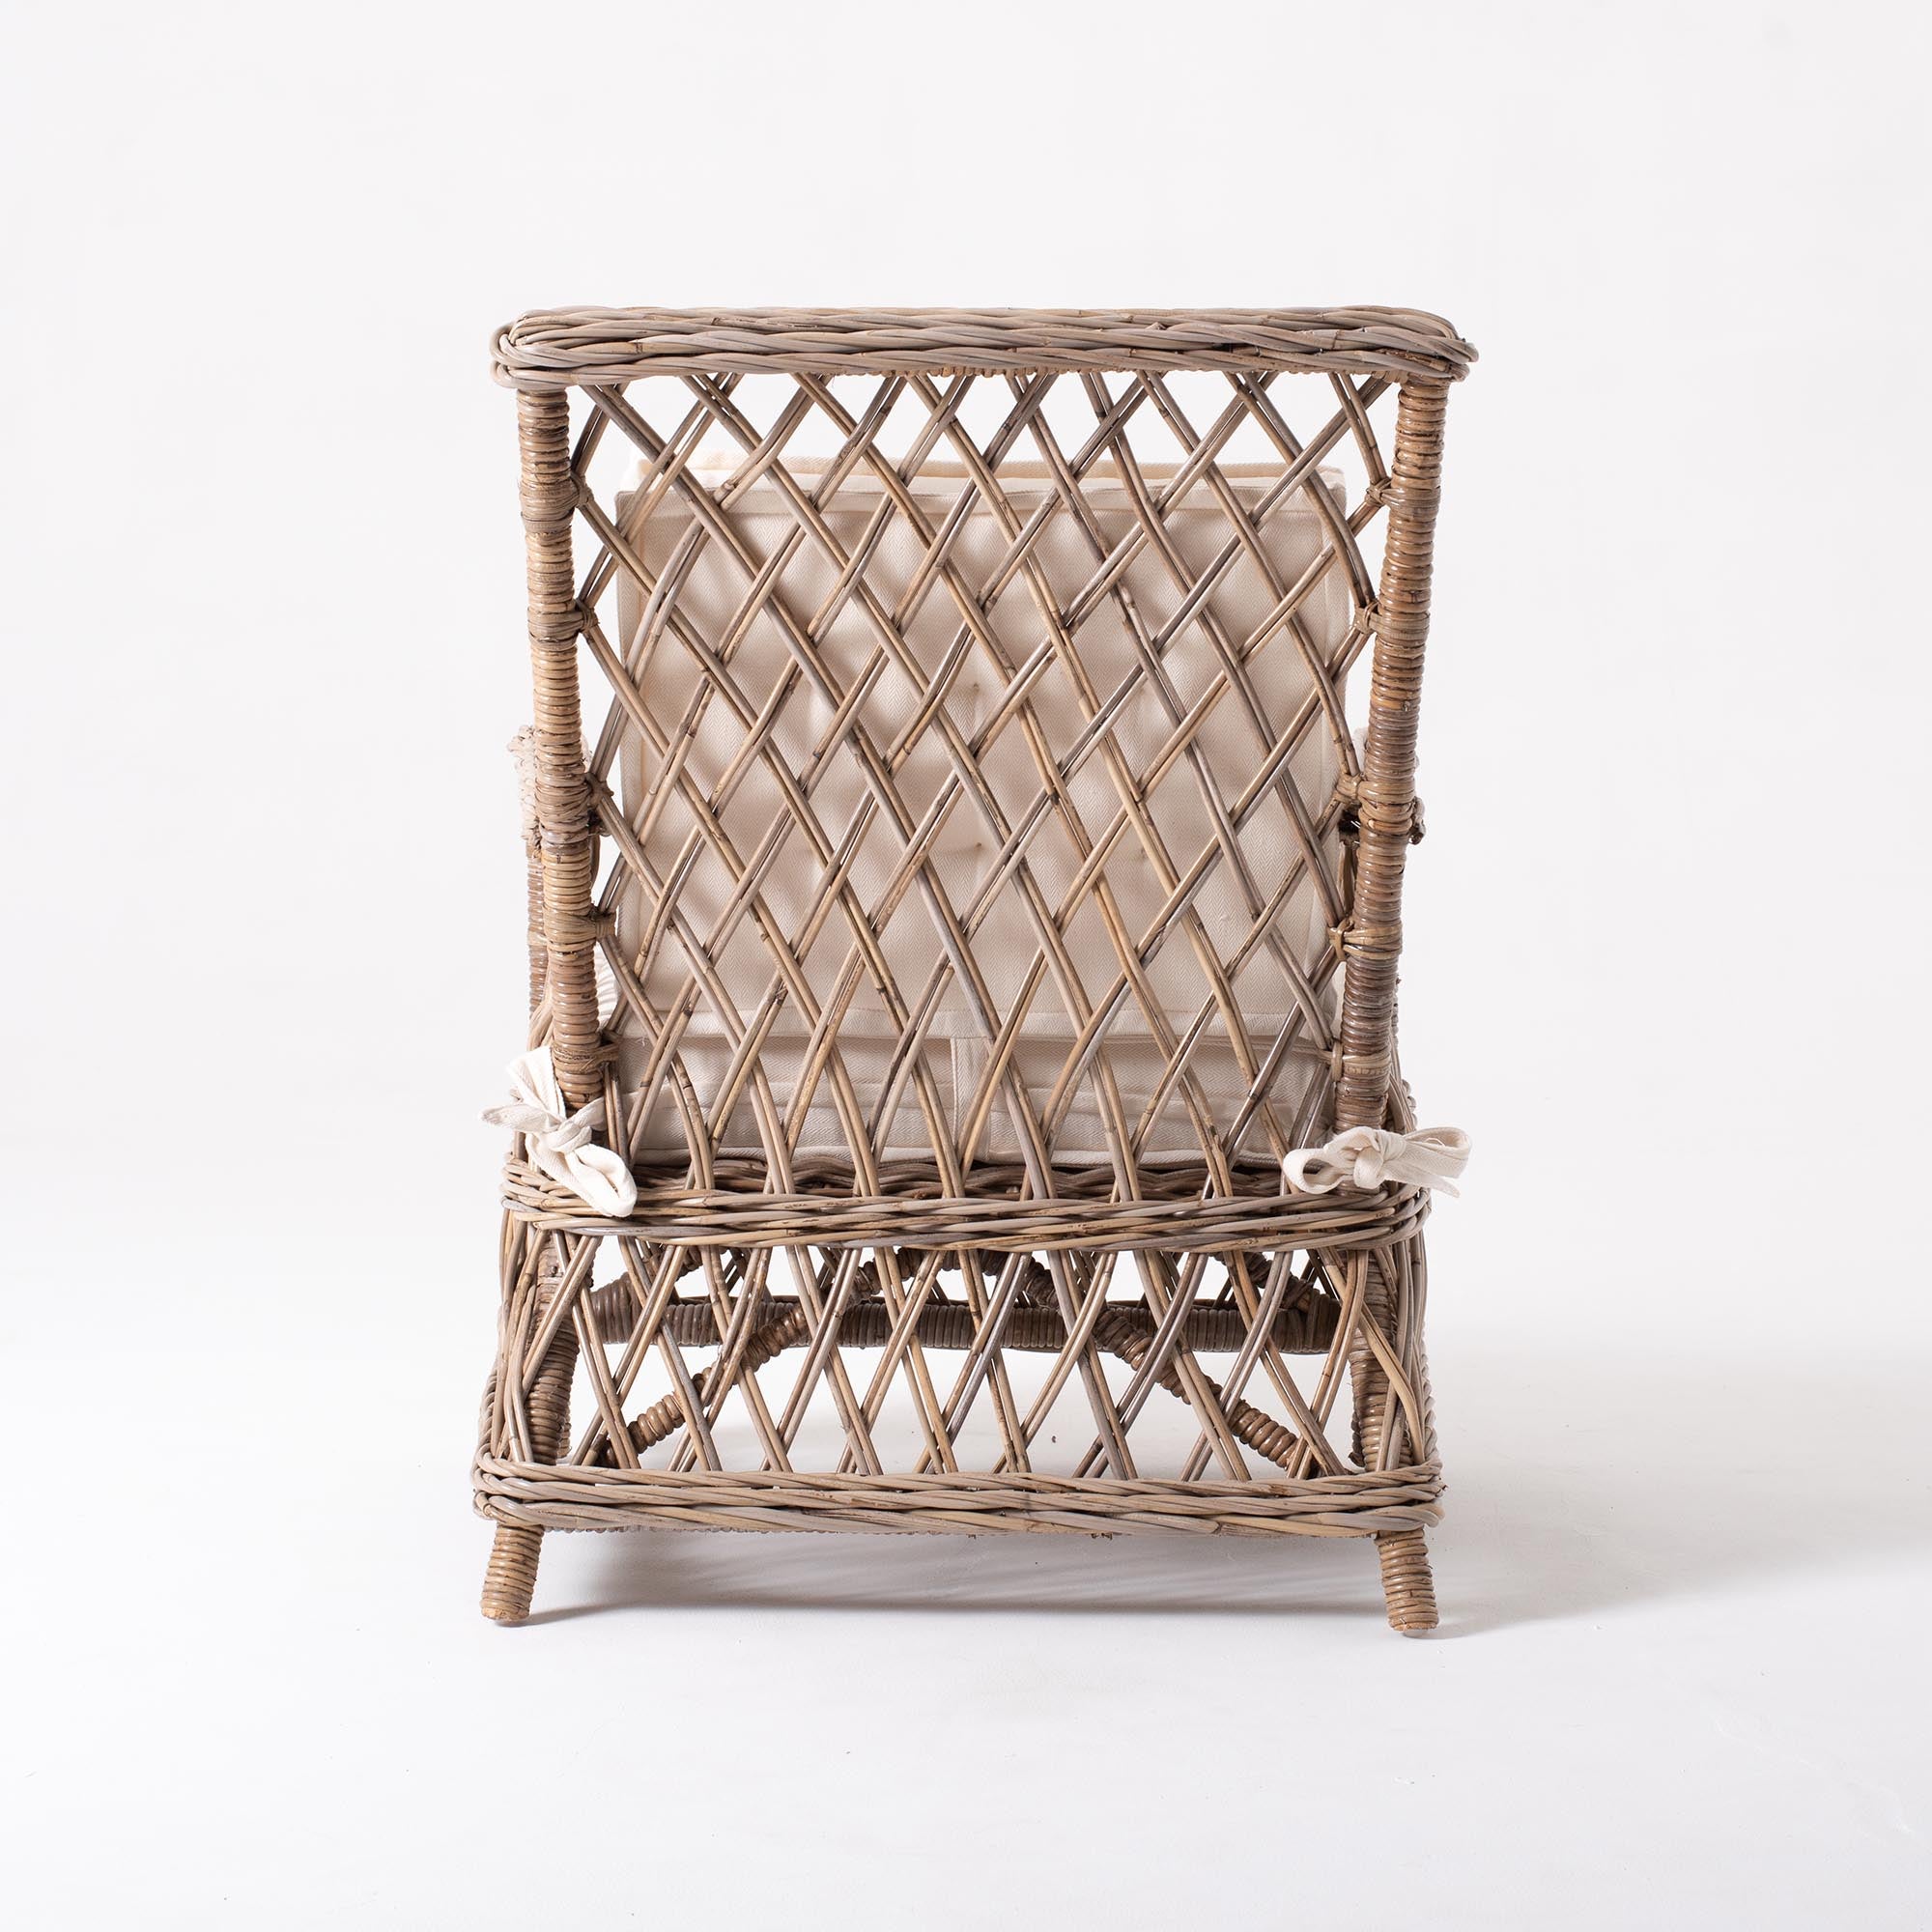 2 pcs. WickerWorks Marquis hand -braided armchair in natural rattan with cushions (sold as pair)